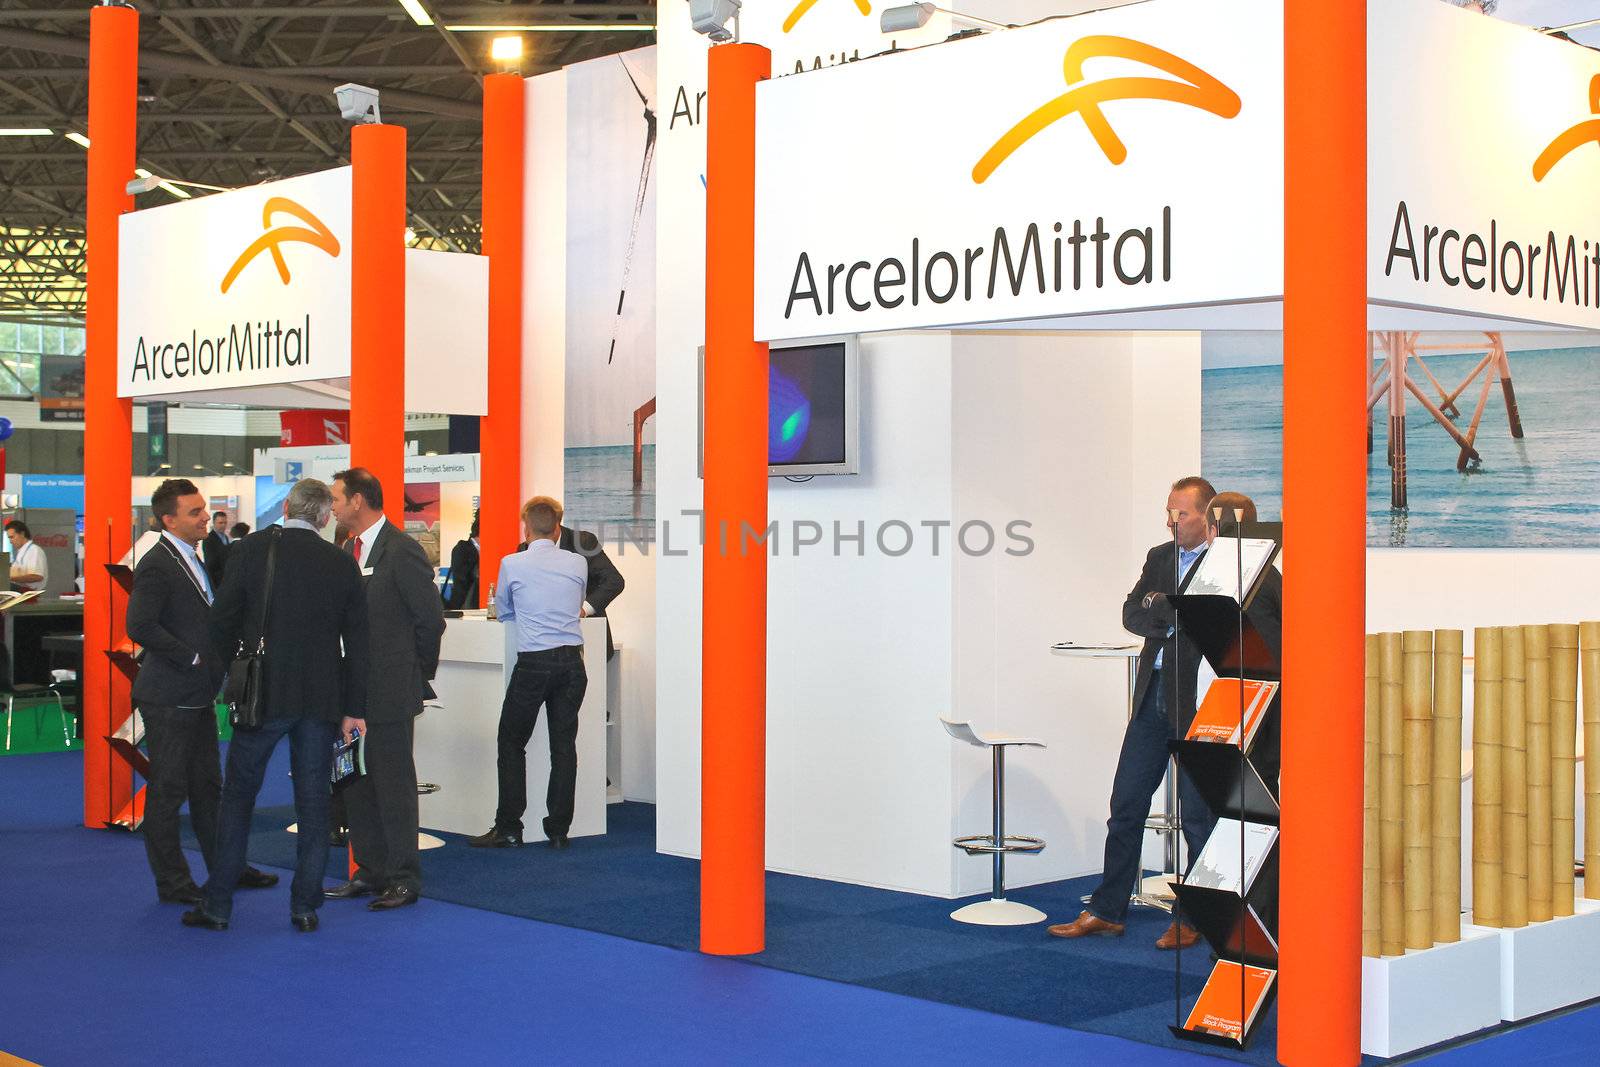 The exhibition Offshore Energy 2012. Amsterdam. Netherlands by NickNick